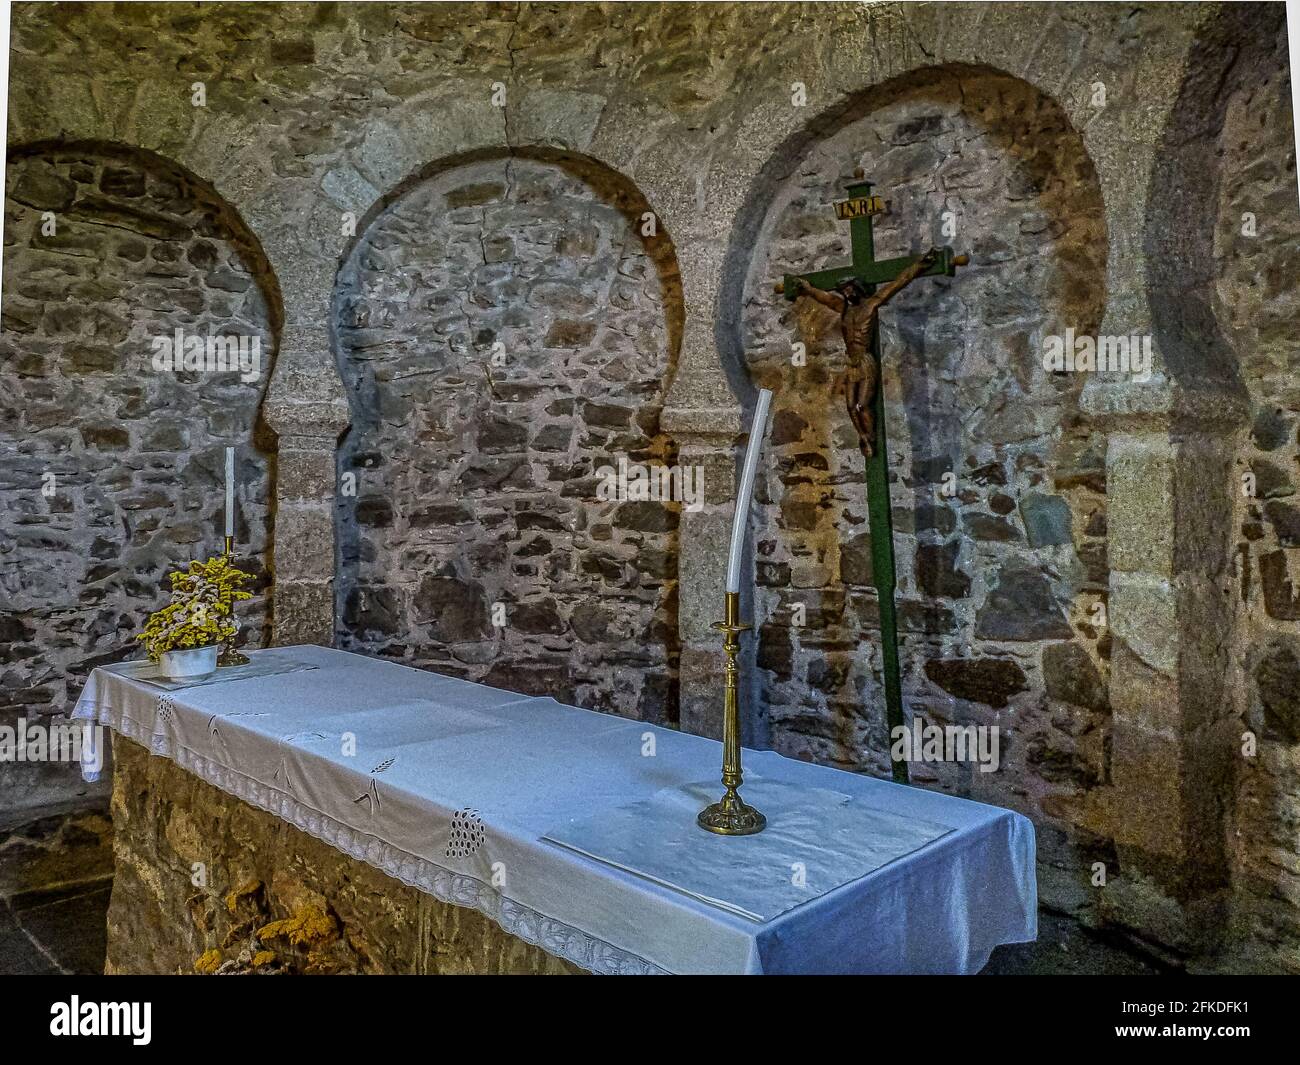 altar with a leaning candle in the ancient mozarabic Church of Santo Tomás de las Ollas, Ponferrada, Spain, July 17, 2010 Stock Photo